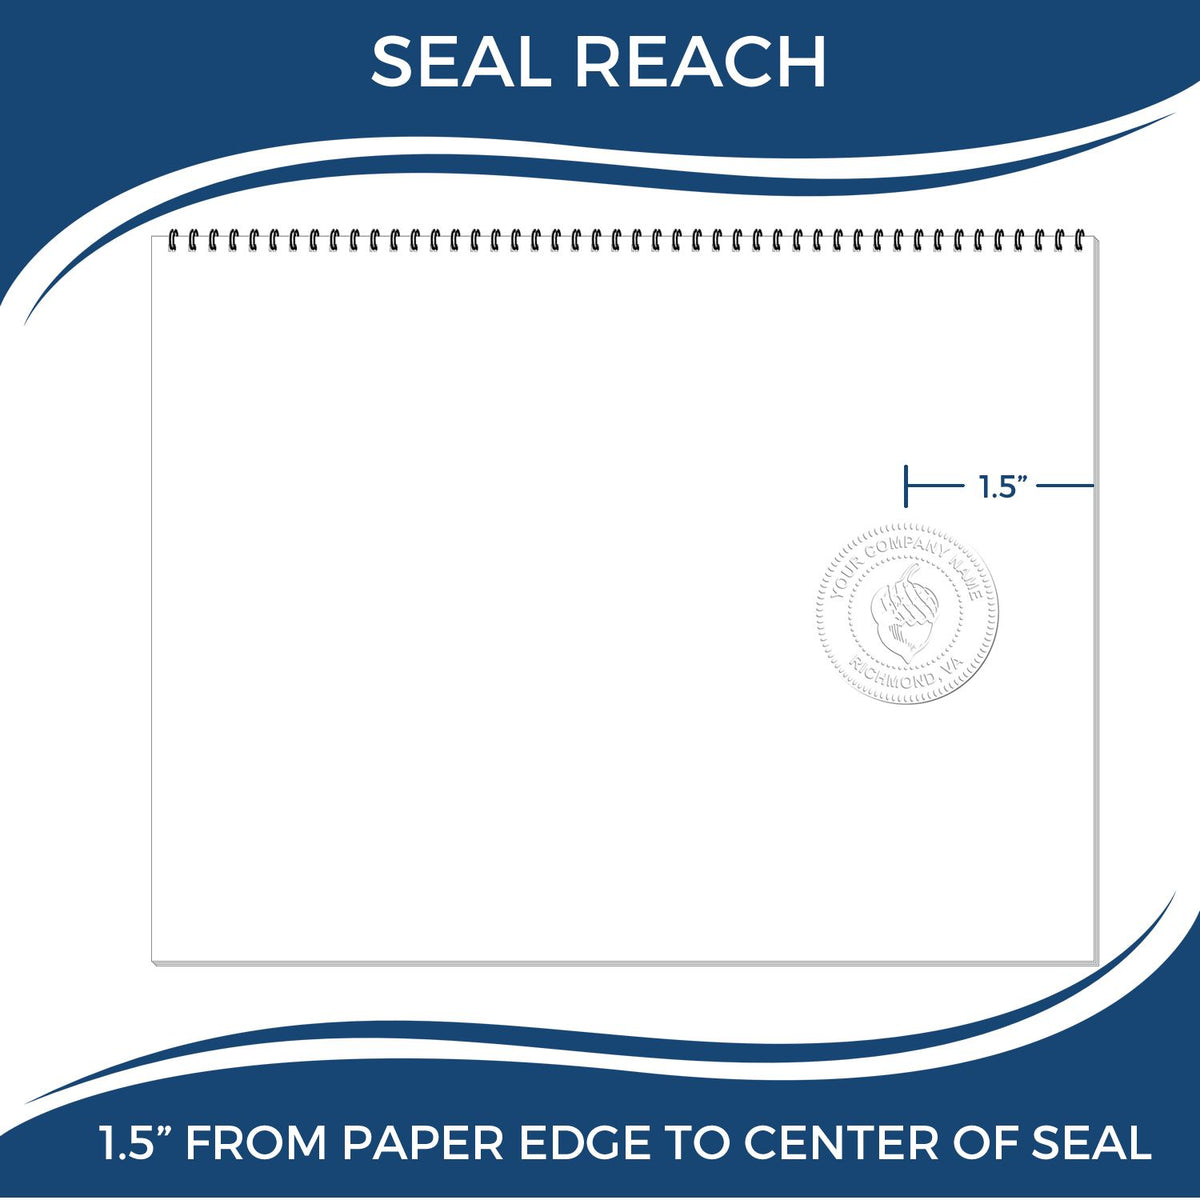 An infographic showing the seal reach which is represented by a ruler and a miniature seal image of the Pennsylvania Desk Architect Embossing Seal